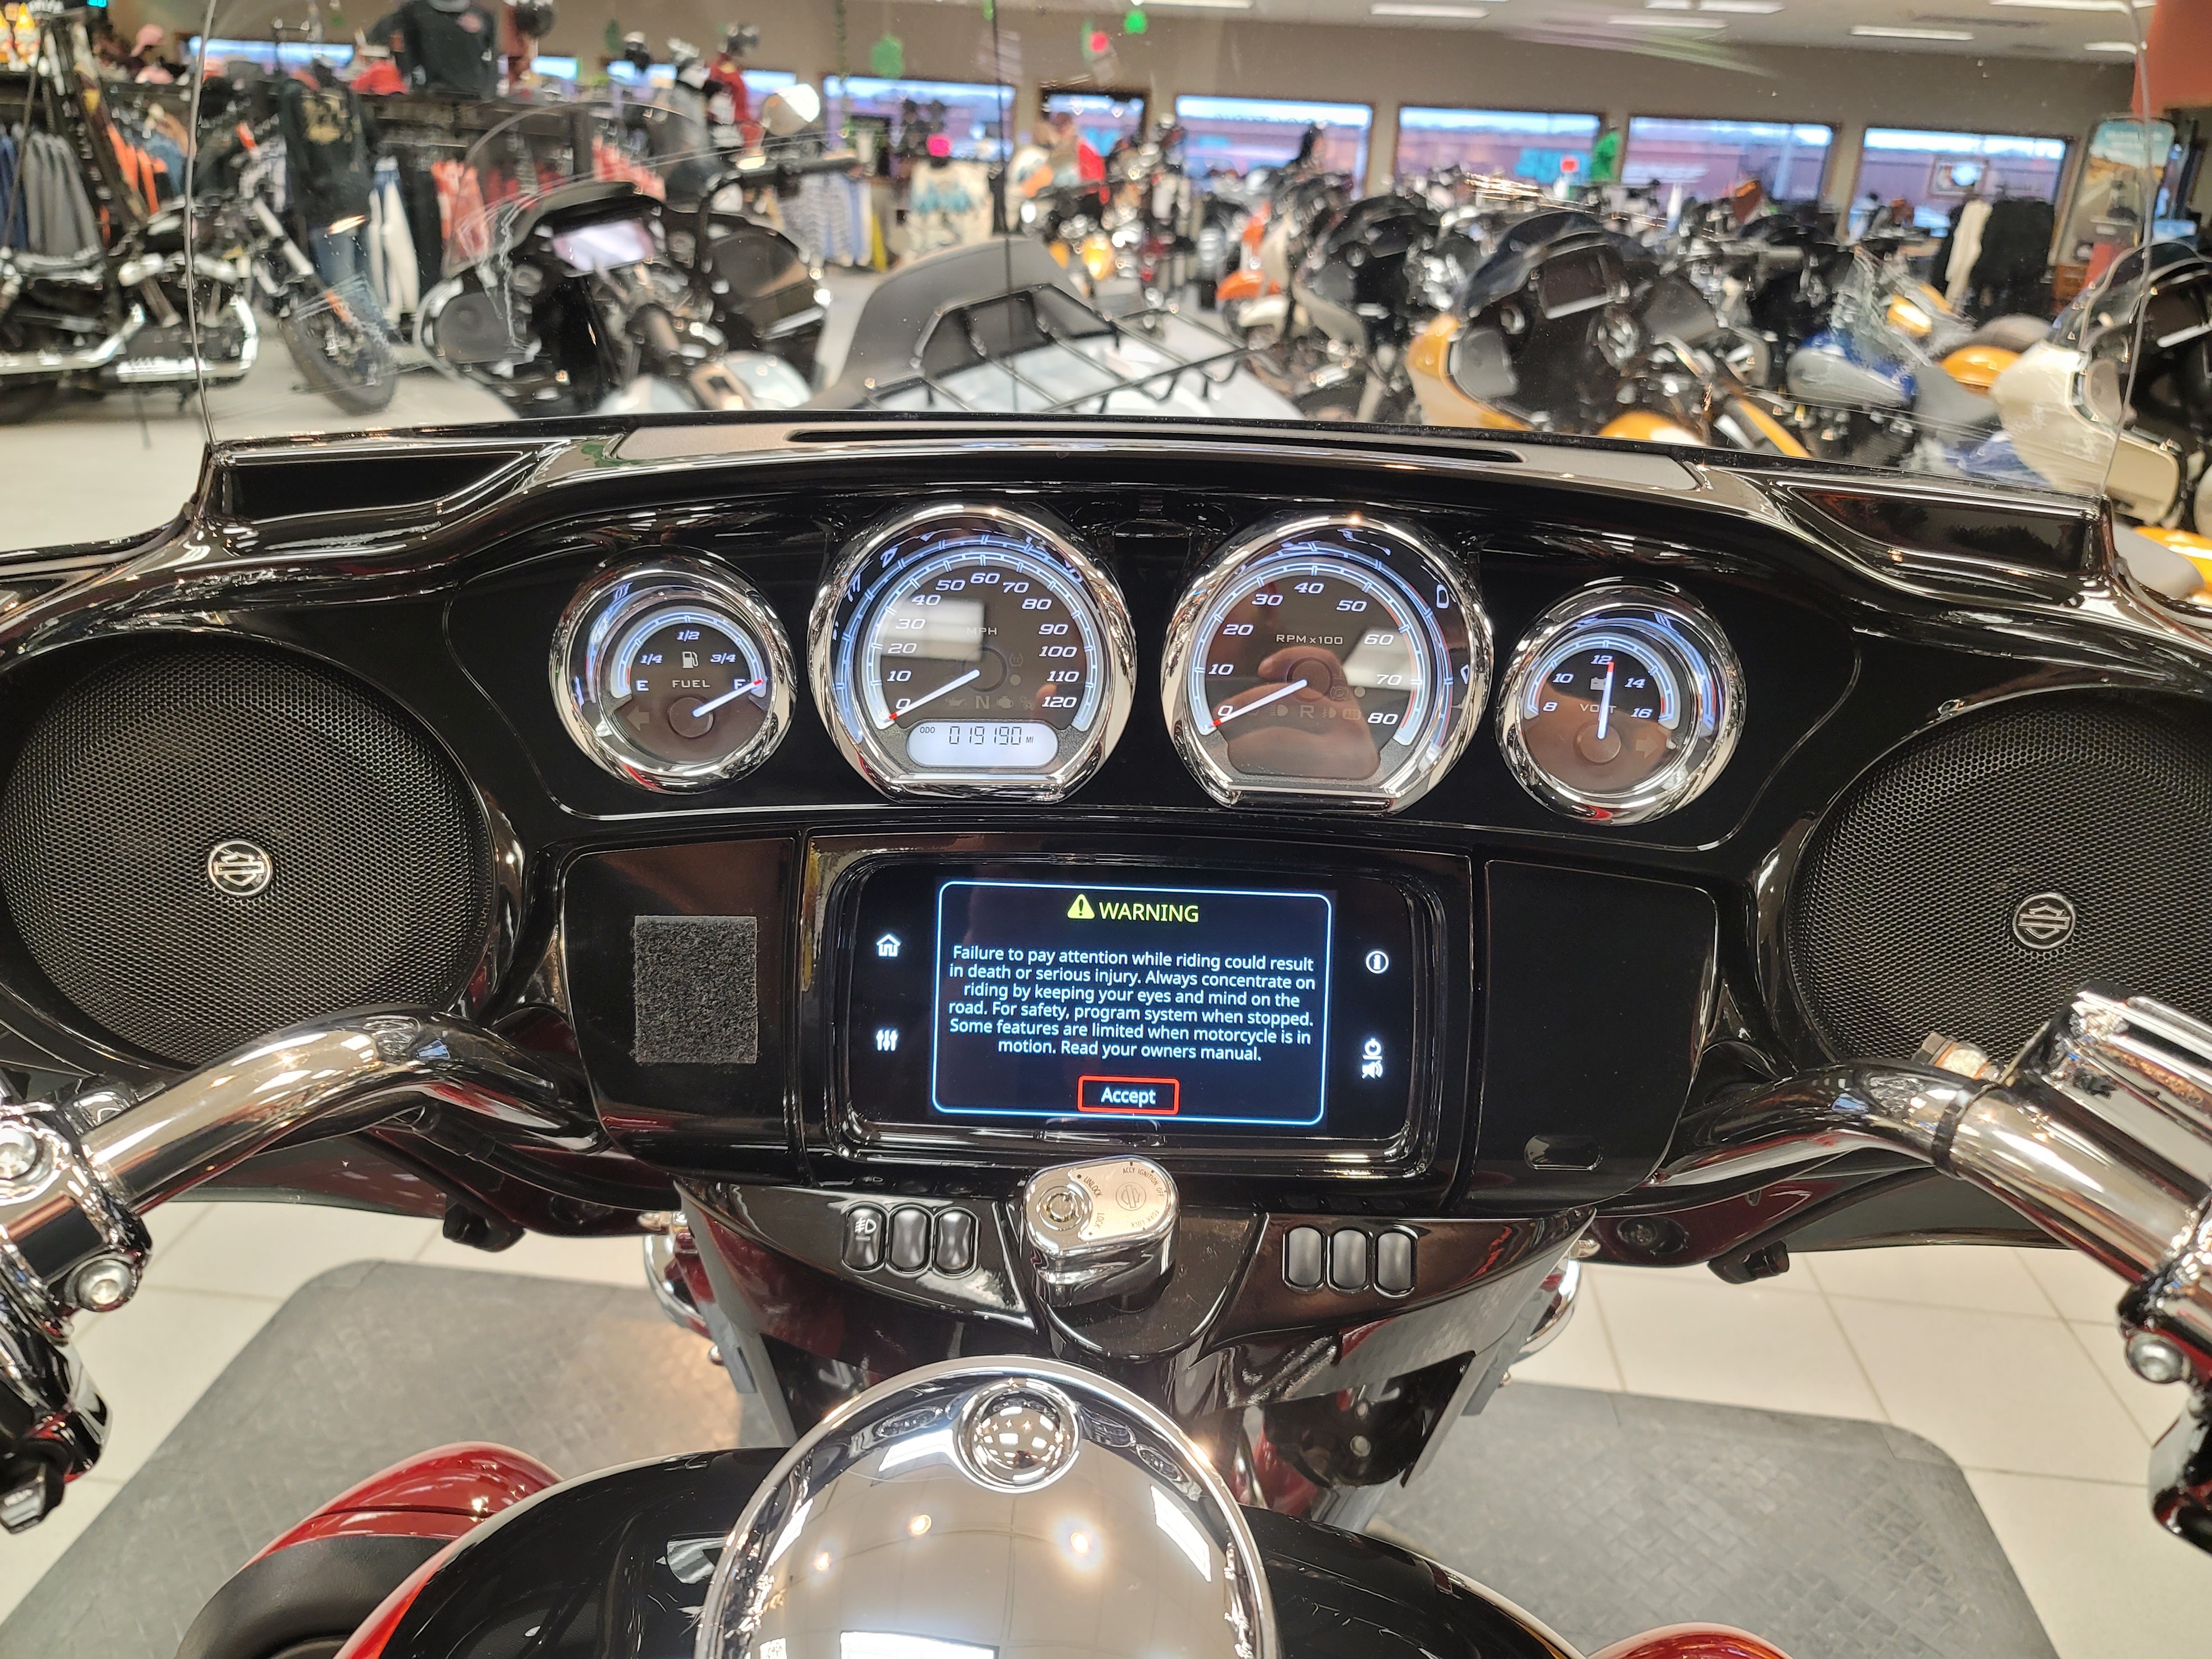 2021 Harley-Davidson Grand American Touring Ultra Limited at Rooster's Harley Davidson